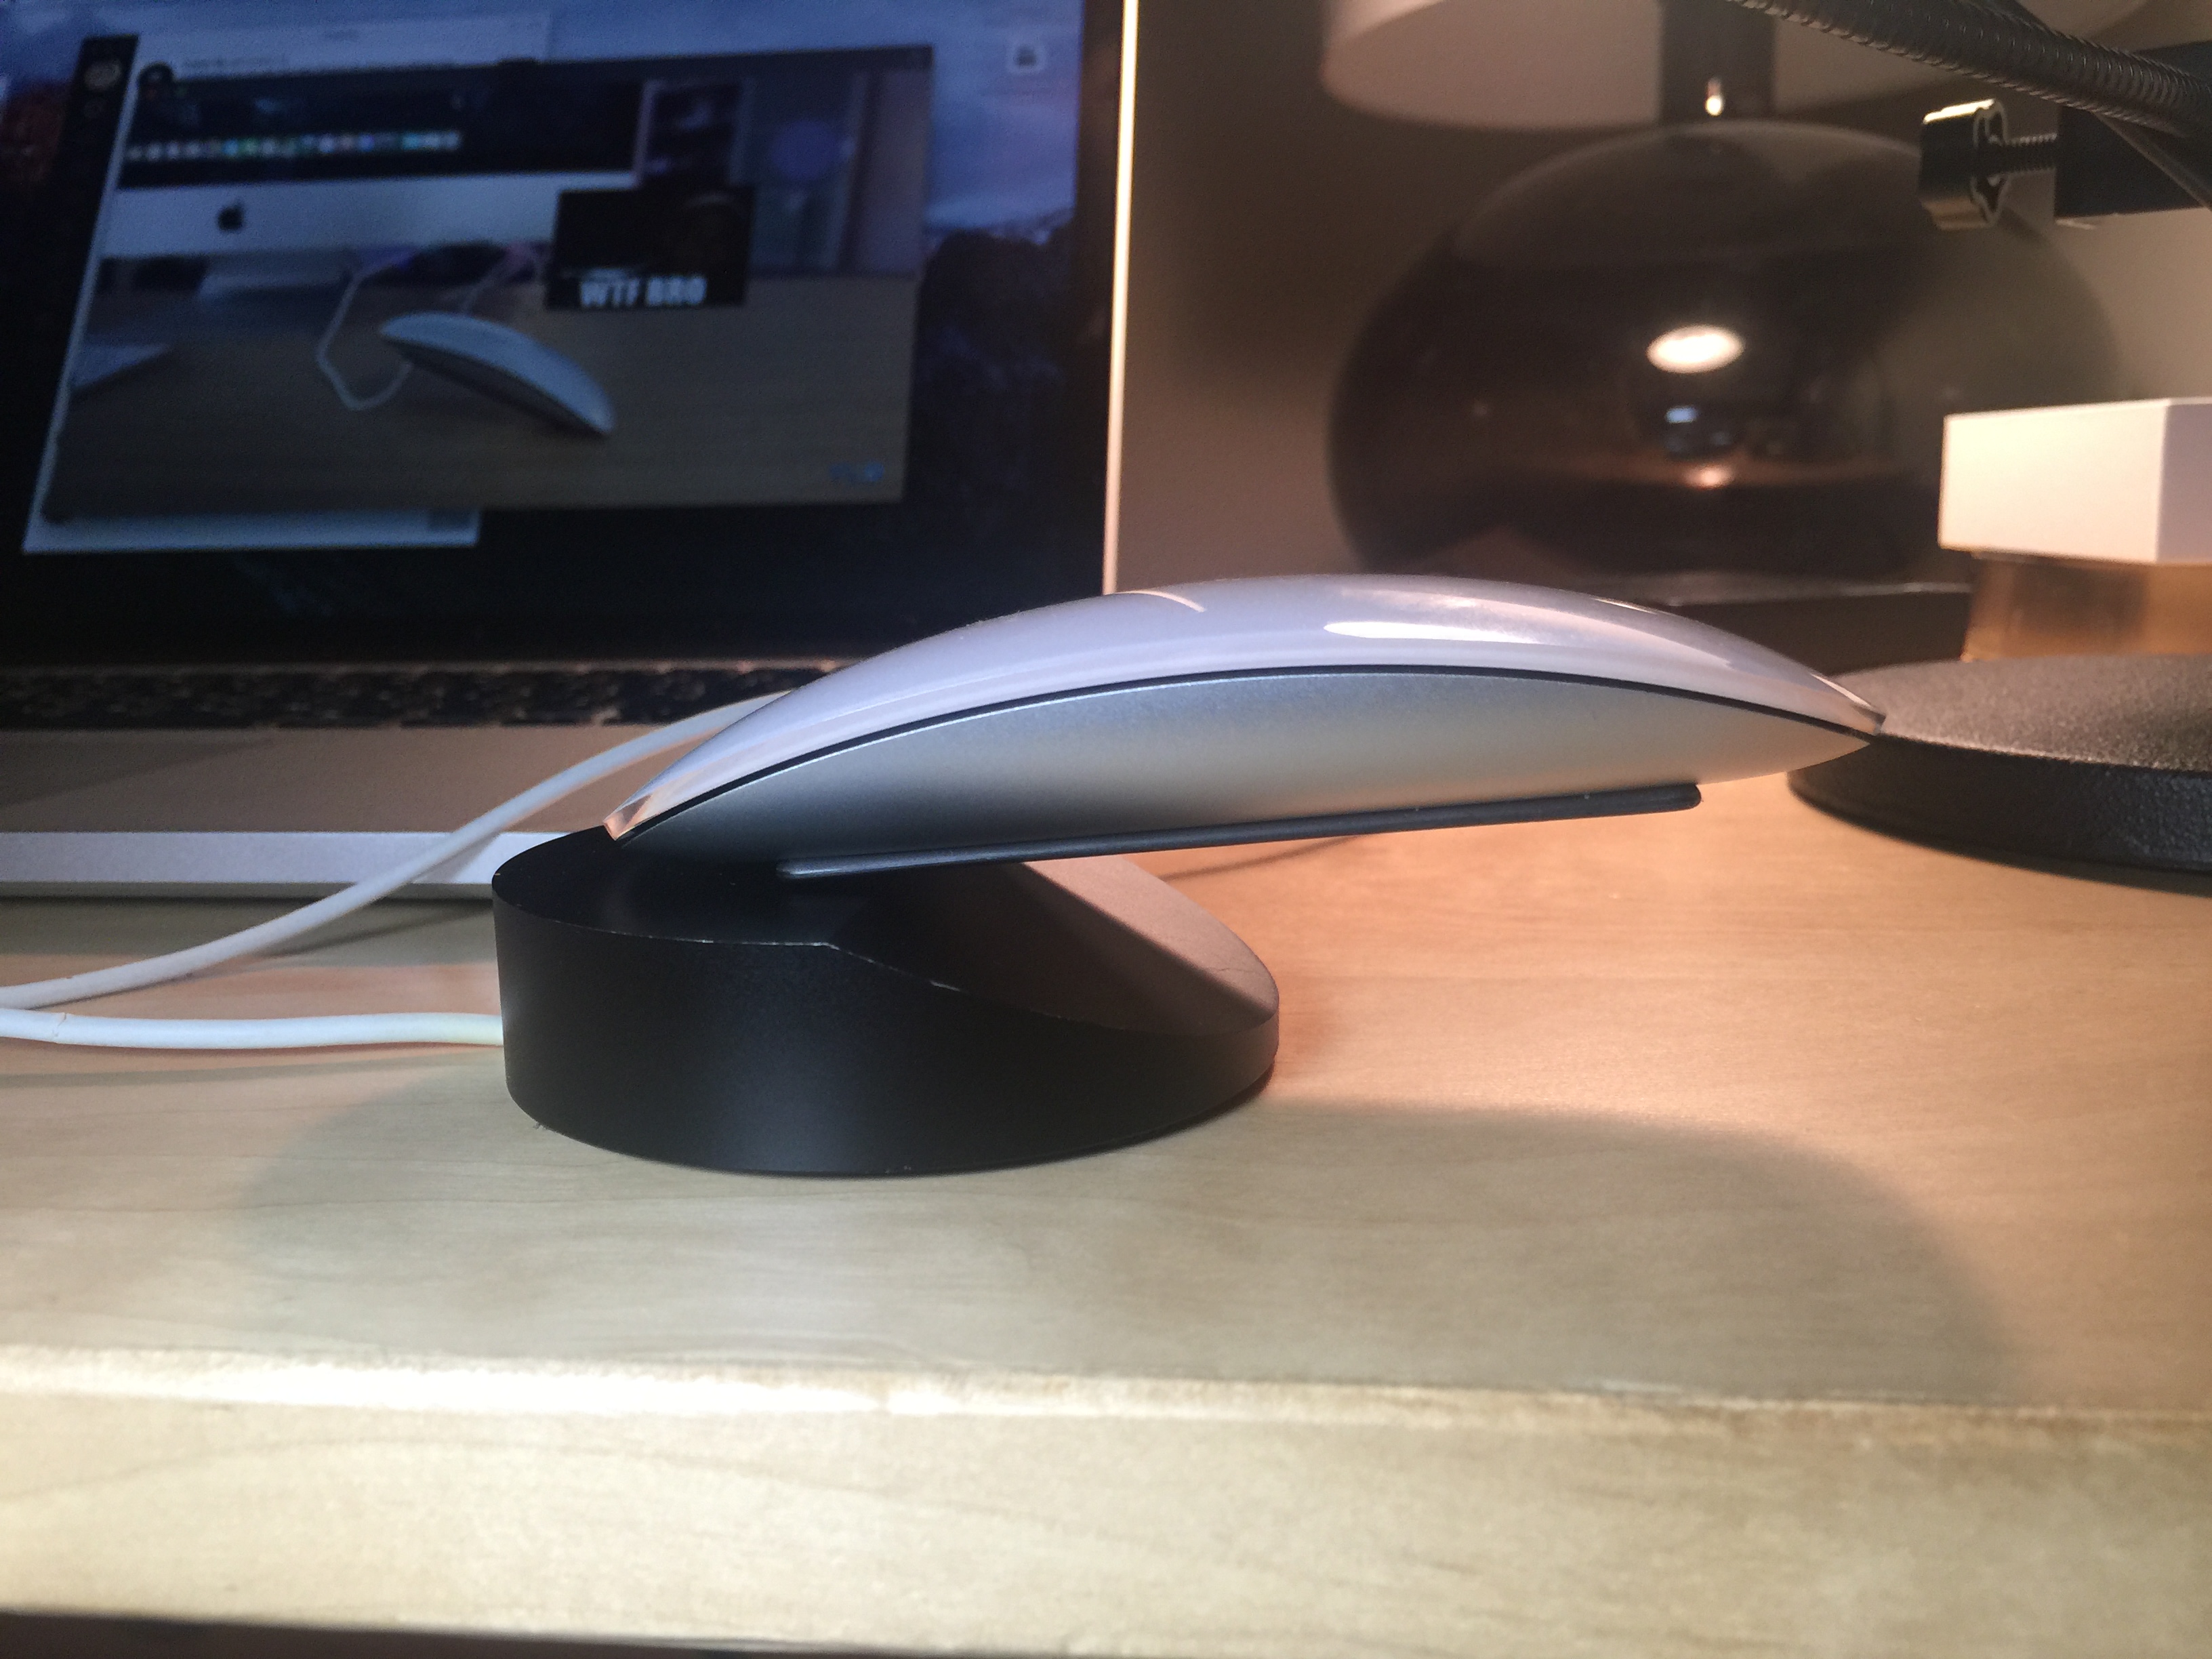 MouseDock magic Mouse